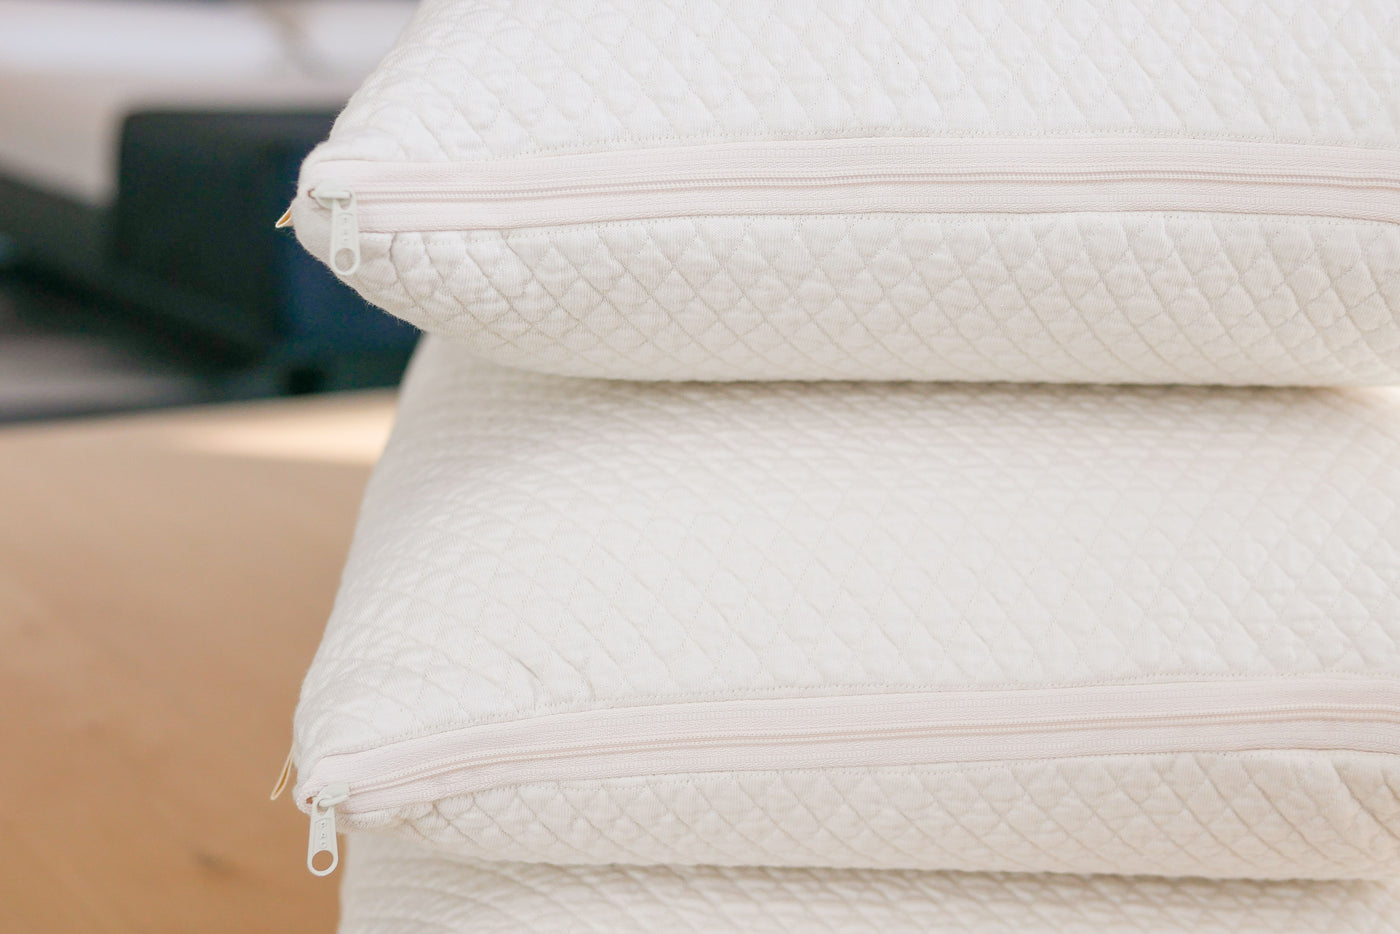 Stack of three 100% natural talalay latex pillows showing the zipper on the organic cotton case